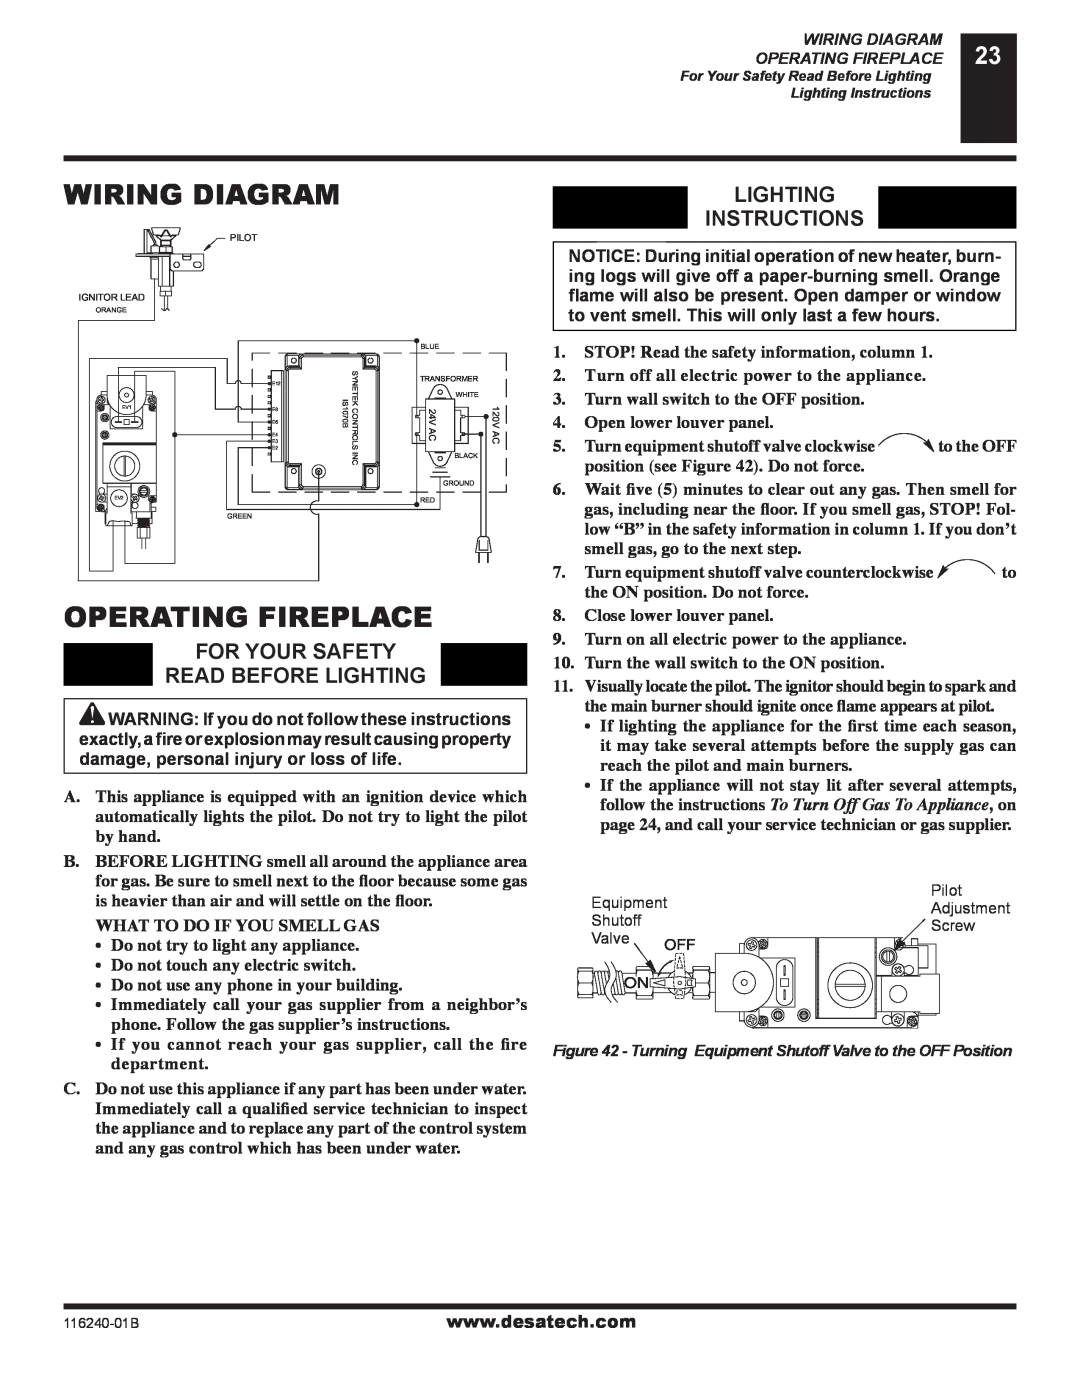 Desa (V)KC42NE SERIE Wiring Diagram, Operating Fireplace, Lighting Instructions, For Your Safety, Read Before Lighting 